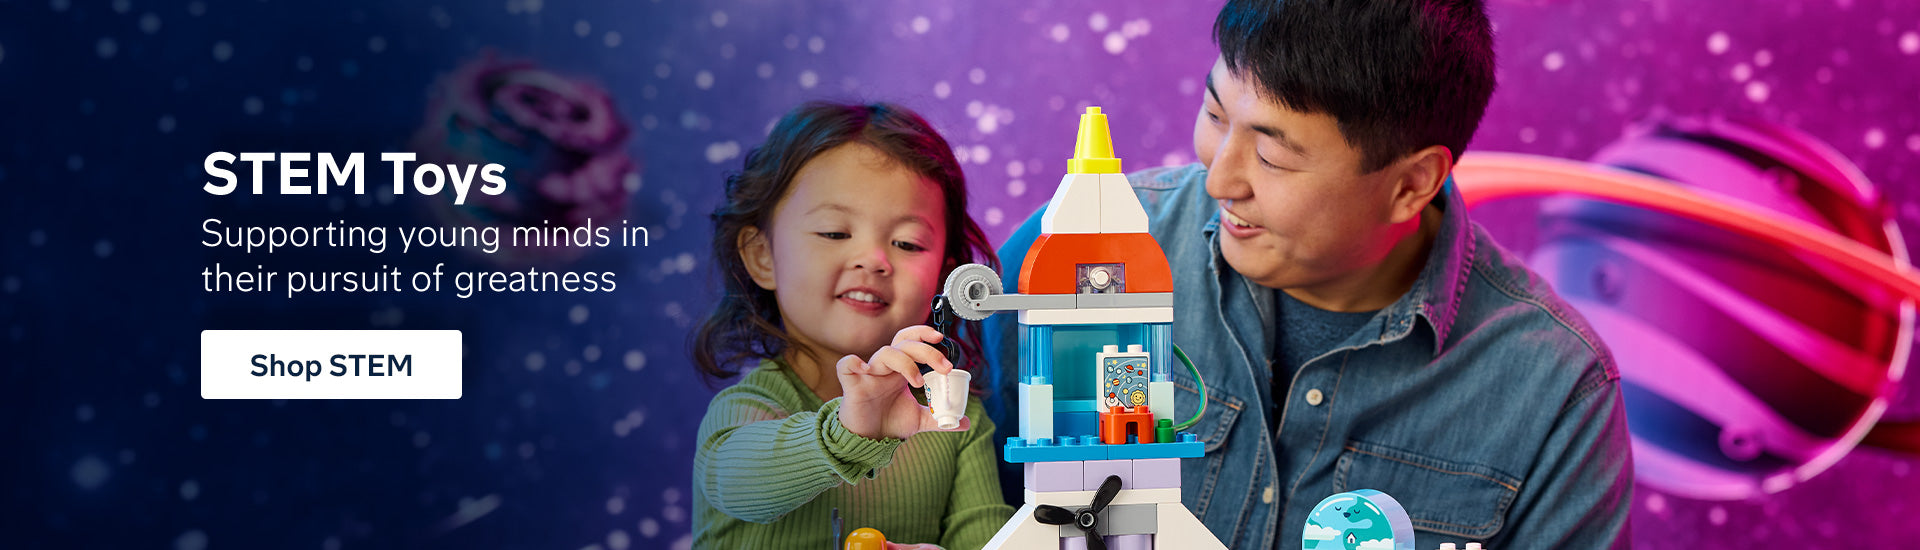 STEM desktop HP banner featuring father interacting with daughter building Legos